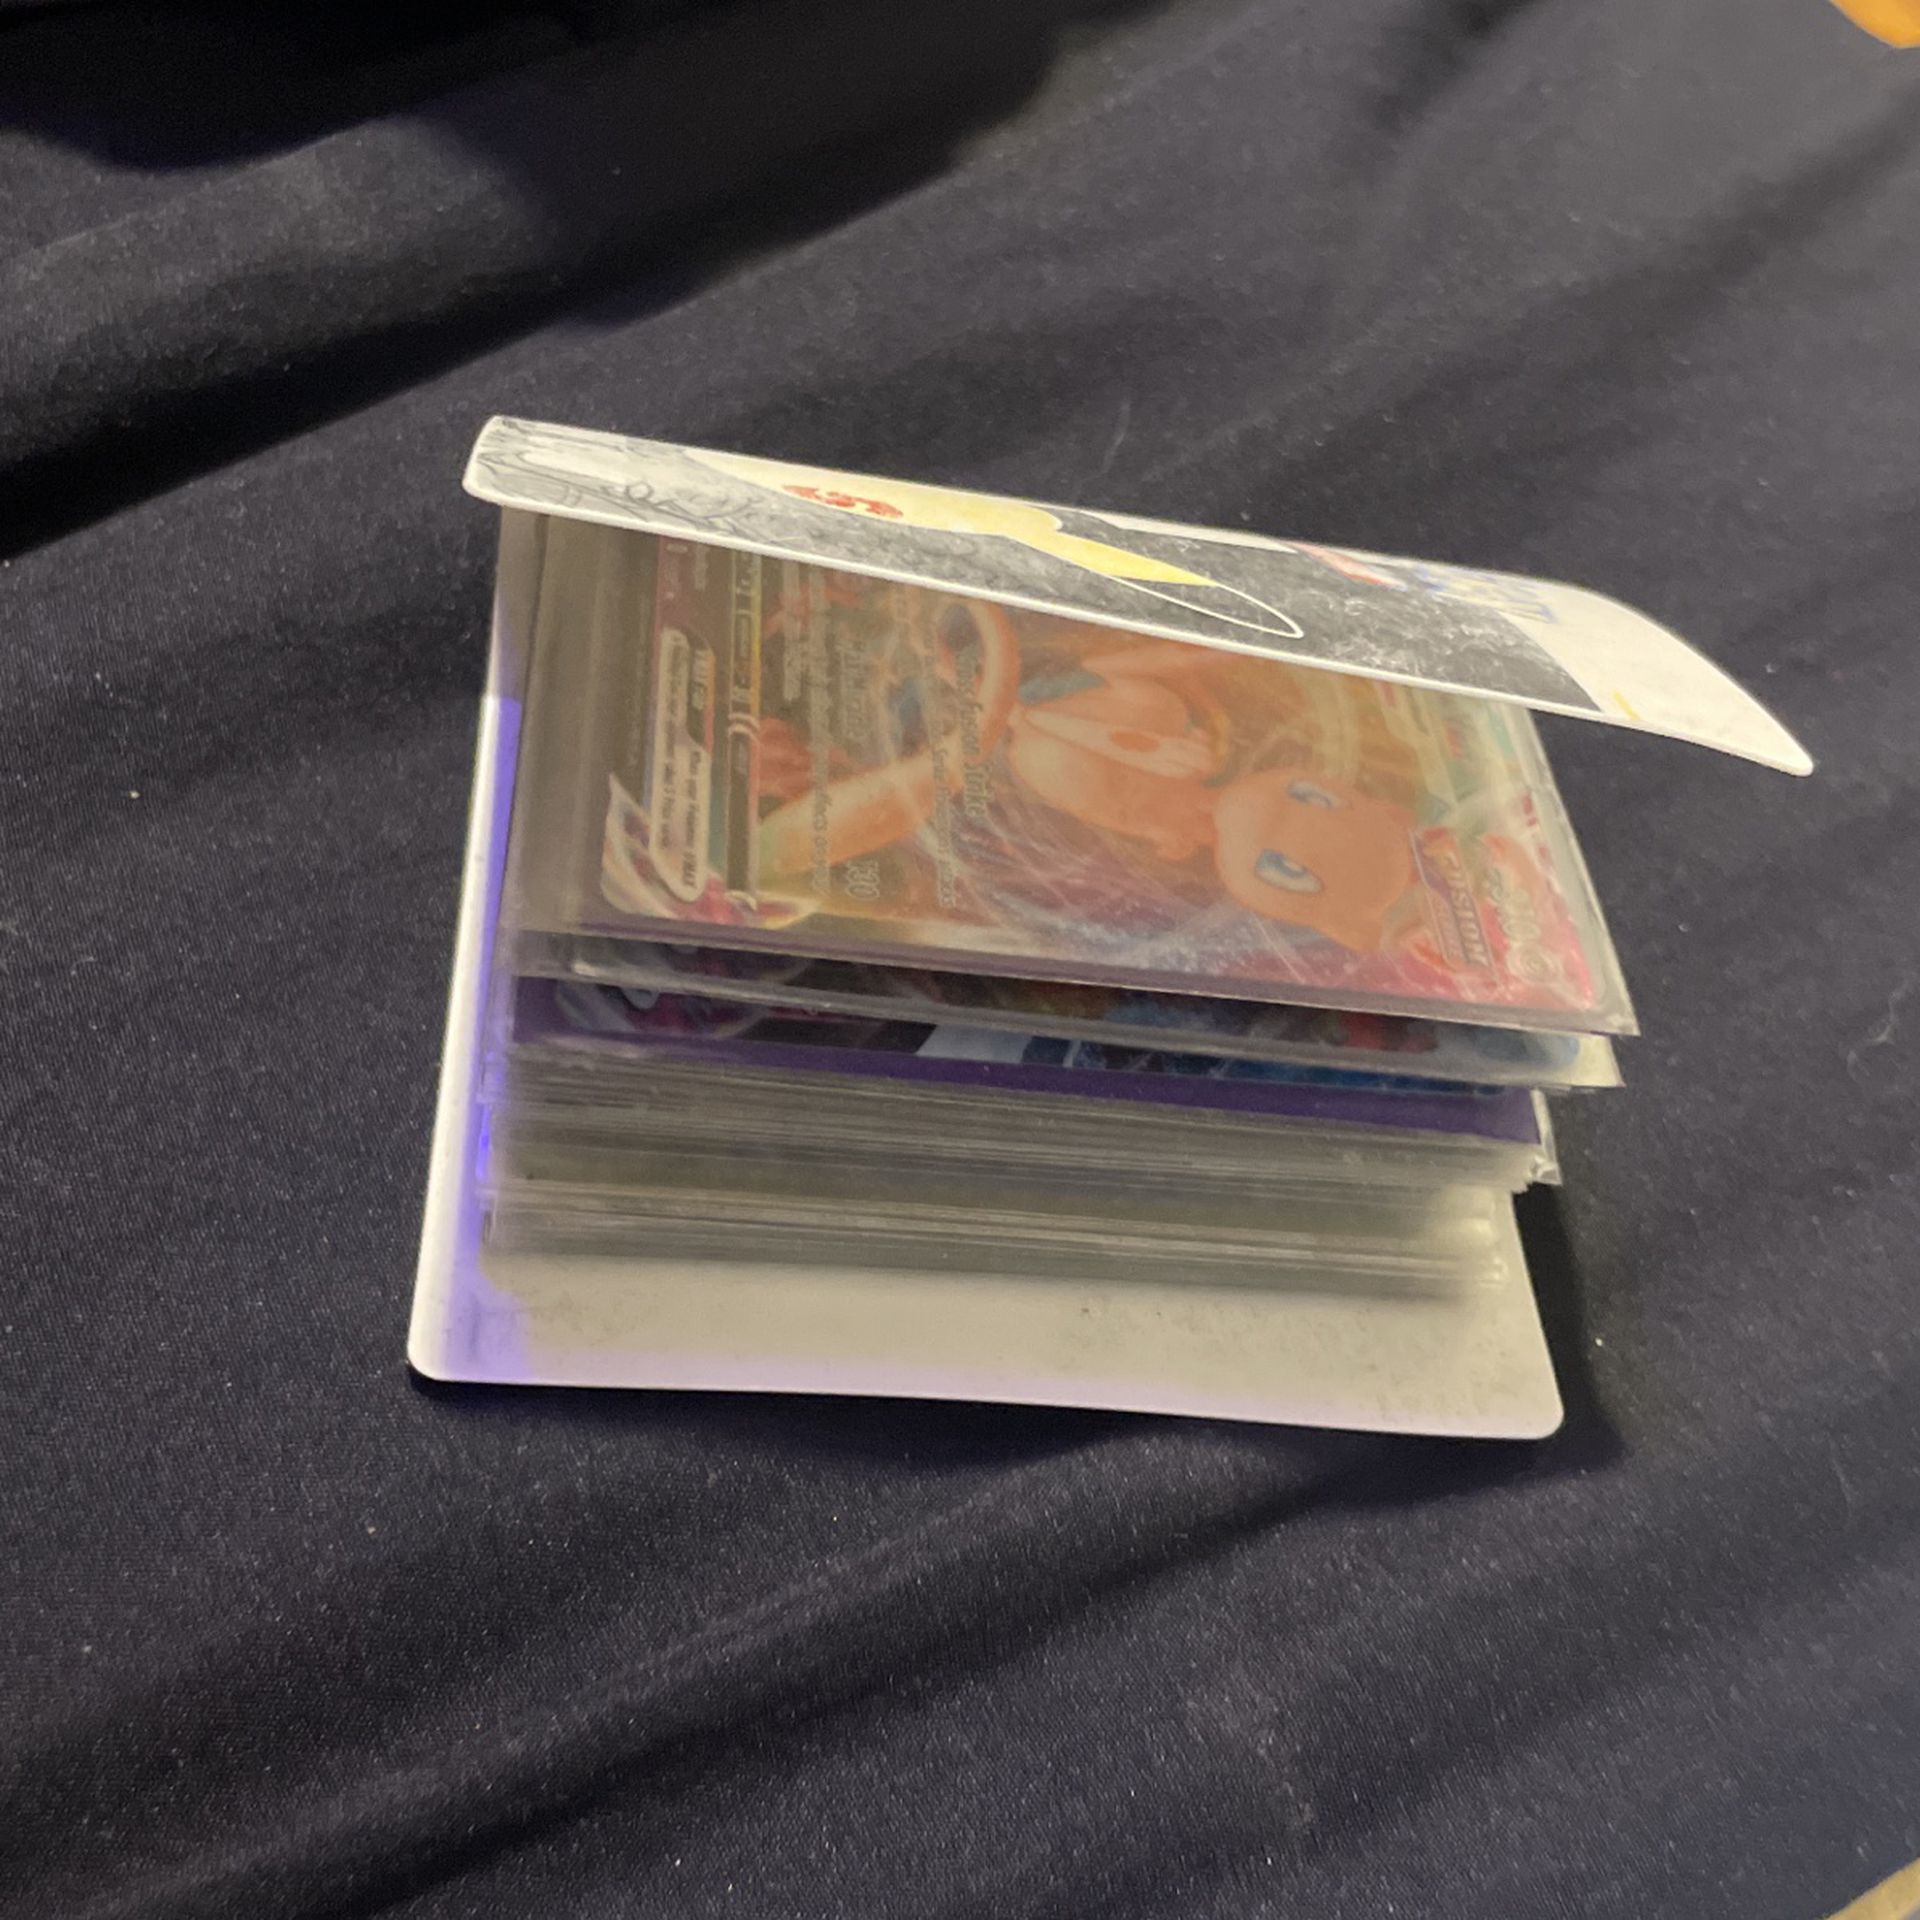 Pokemon Cards Throw In A Price Stacked $6 Per Card